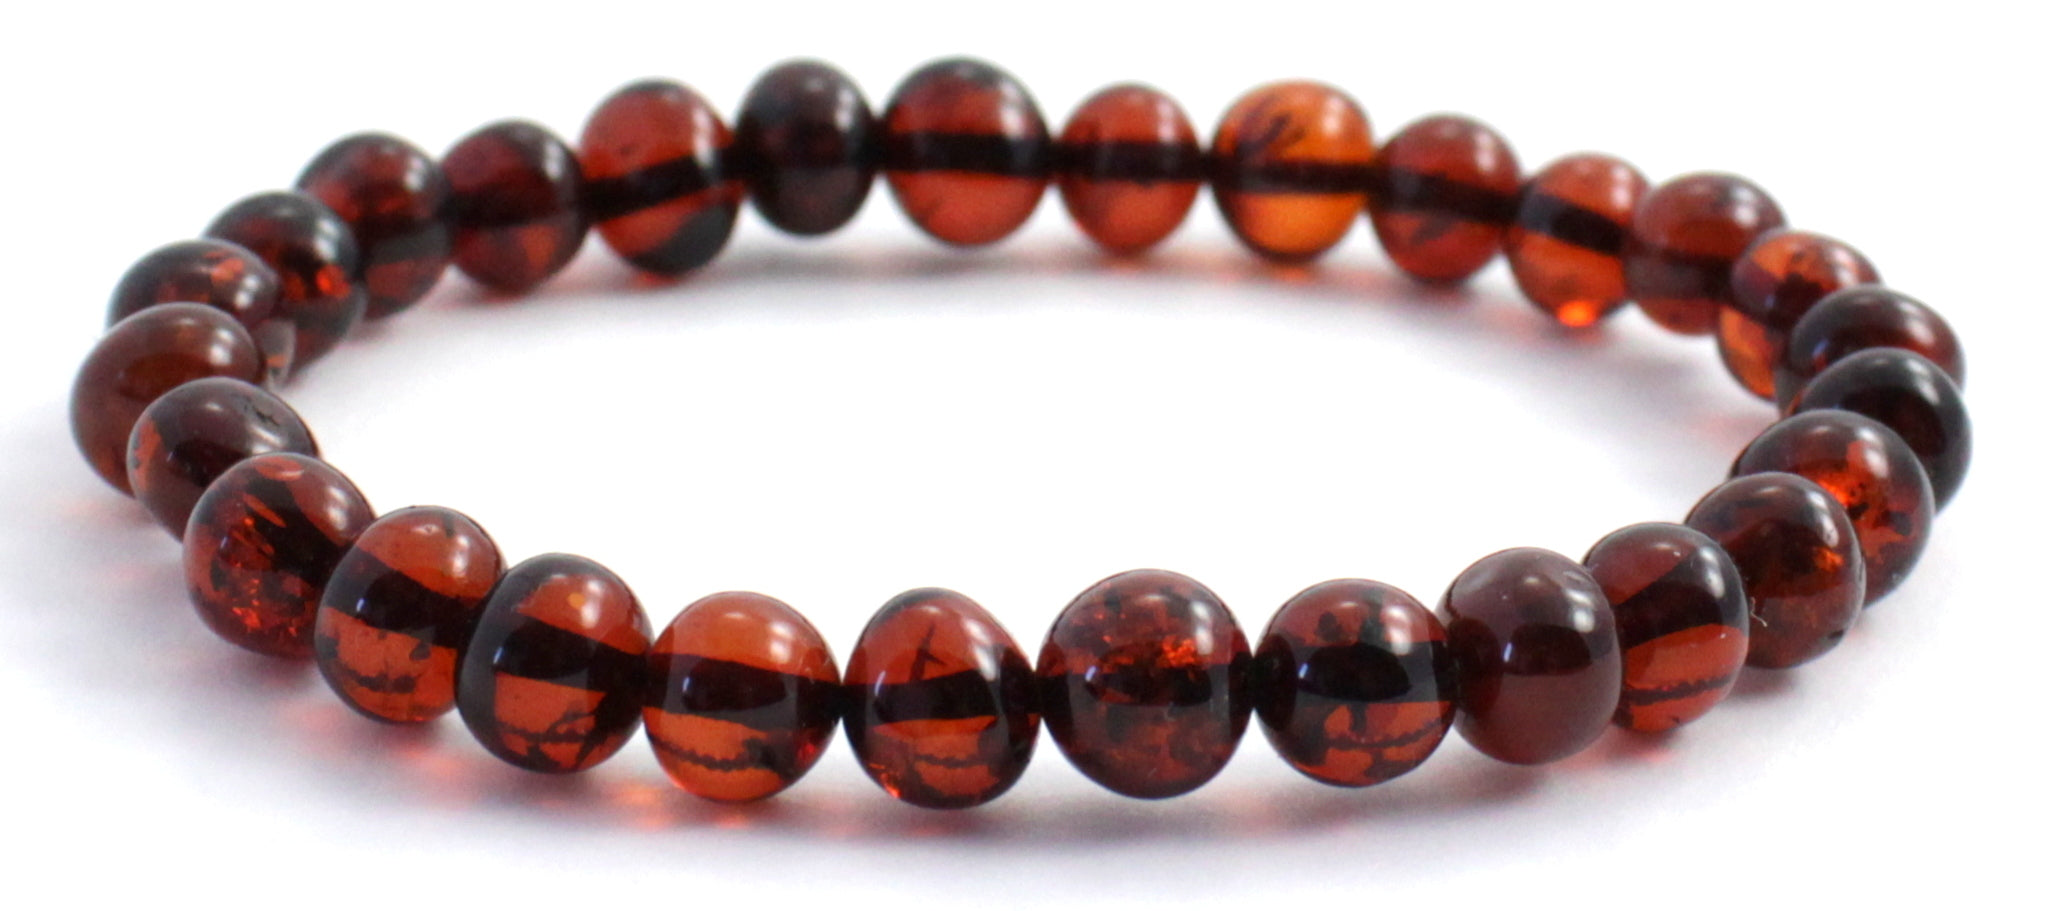 Cherry Black Baltic Amber Bracelet for Women - Polished Beads, 5g Weight, 3 Length Options Bijou Her